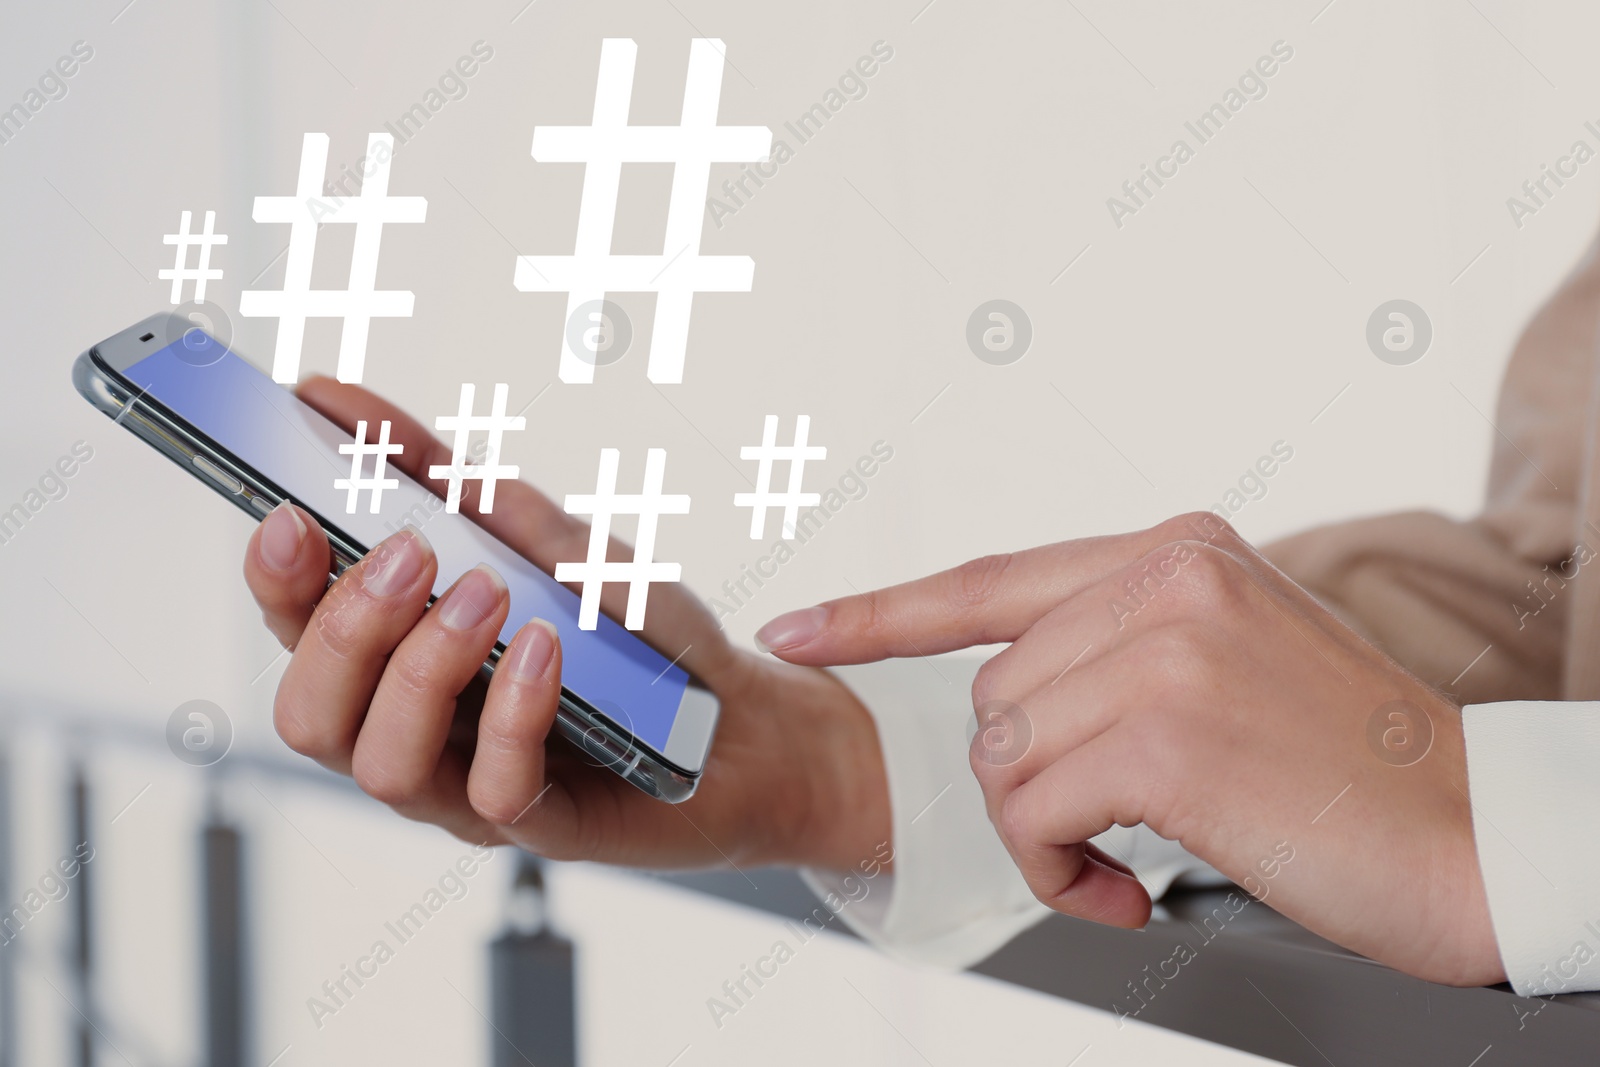 Image of Woman using modern smartphone, closeup. Hashtag symbols over device